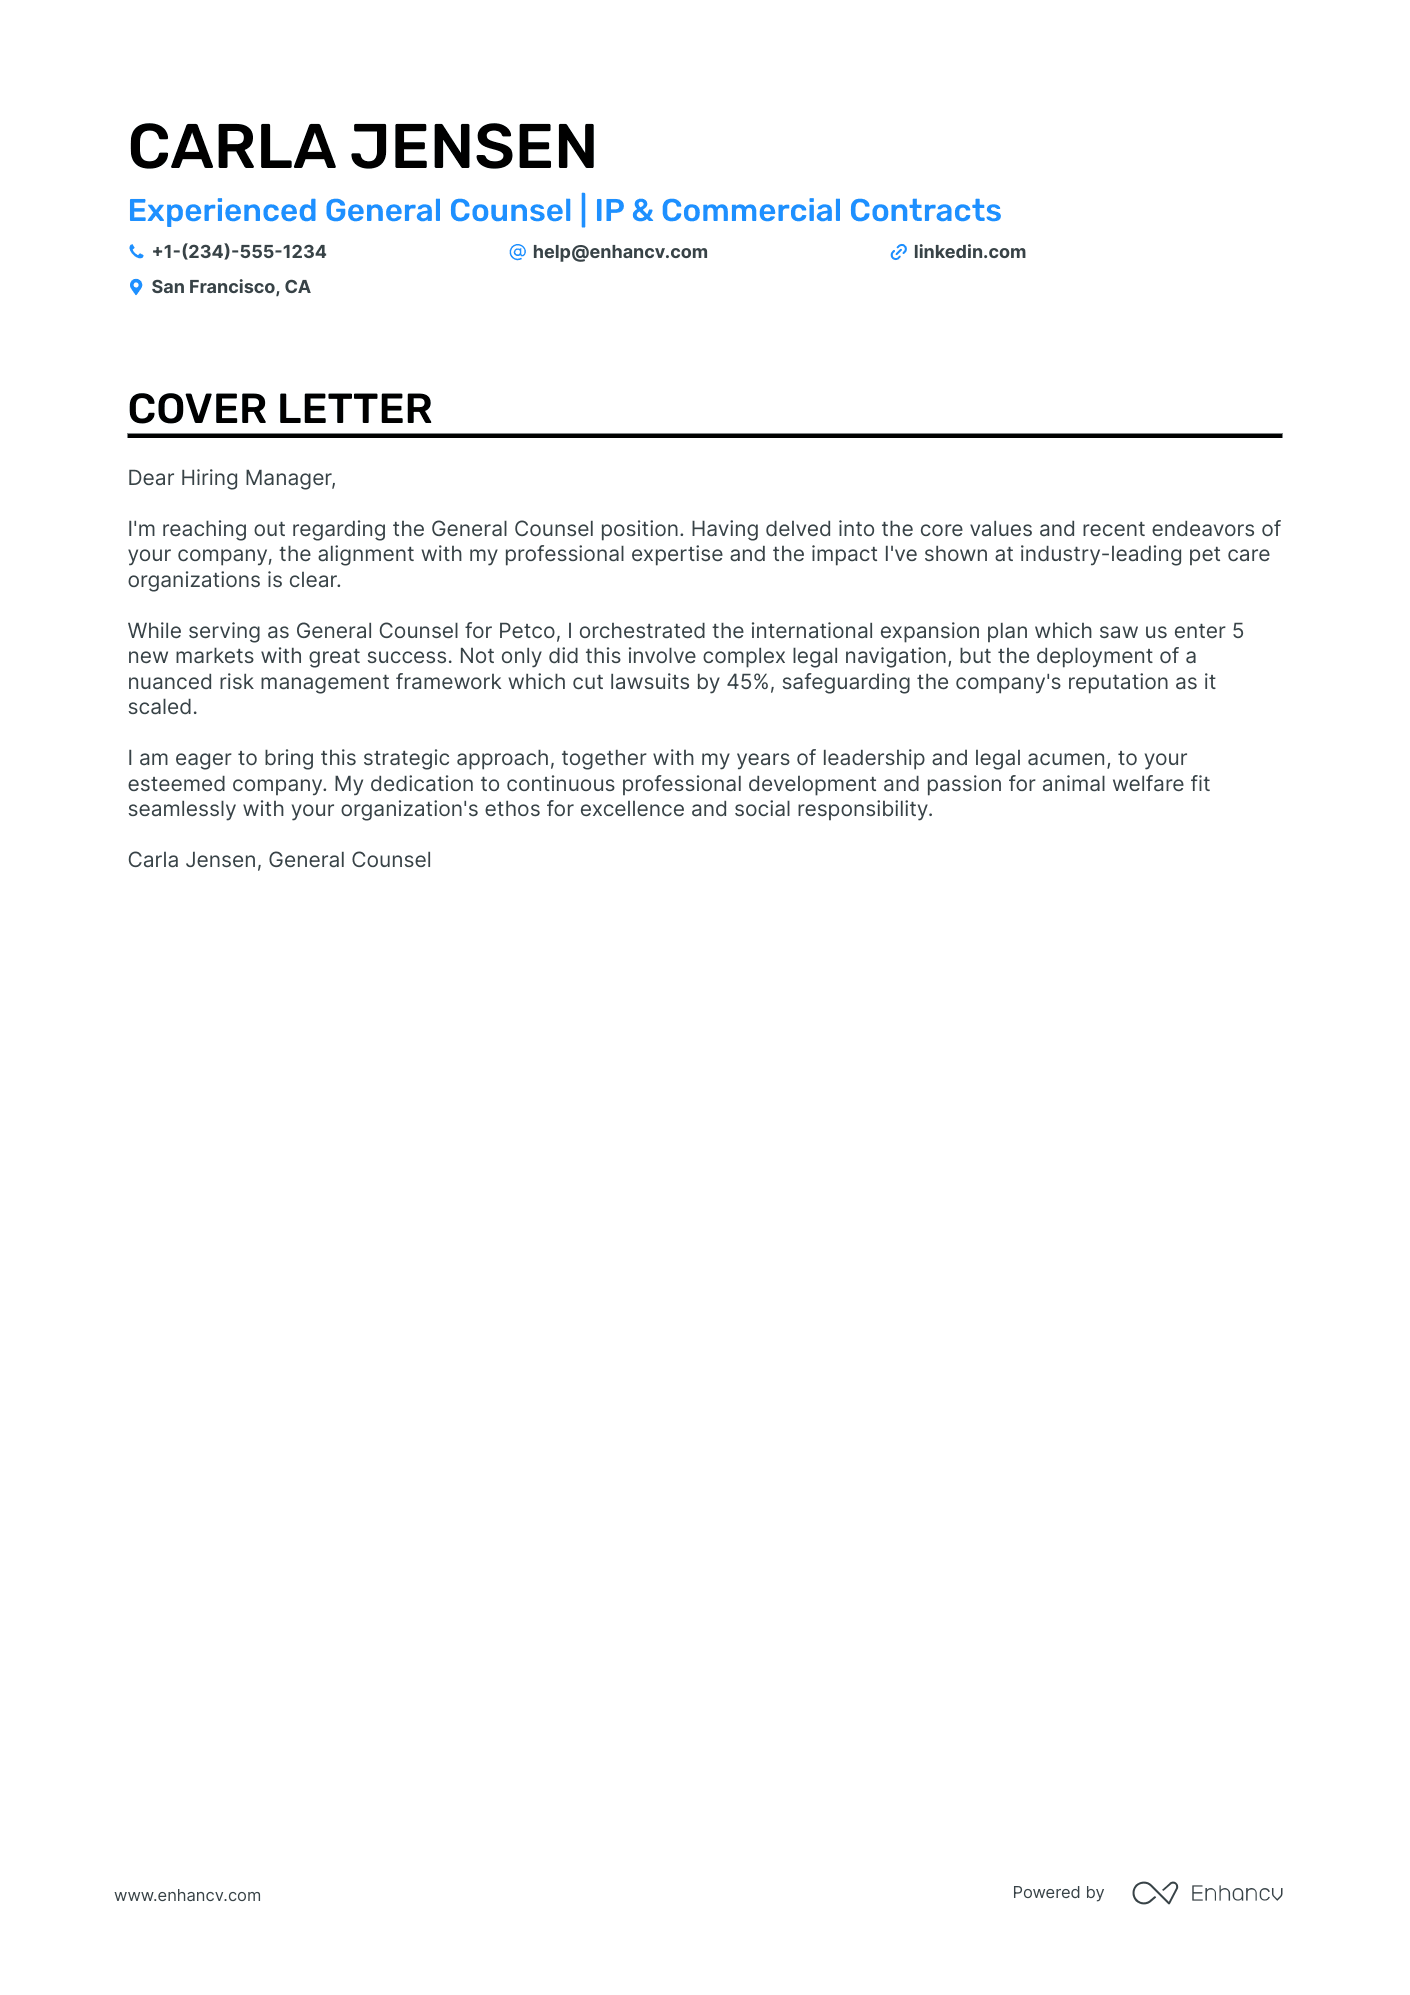 General Counsel cover letter